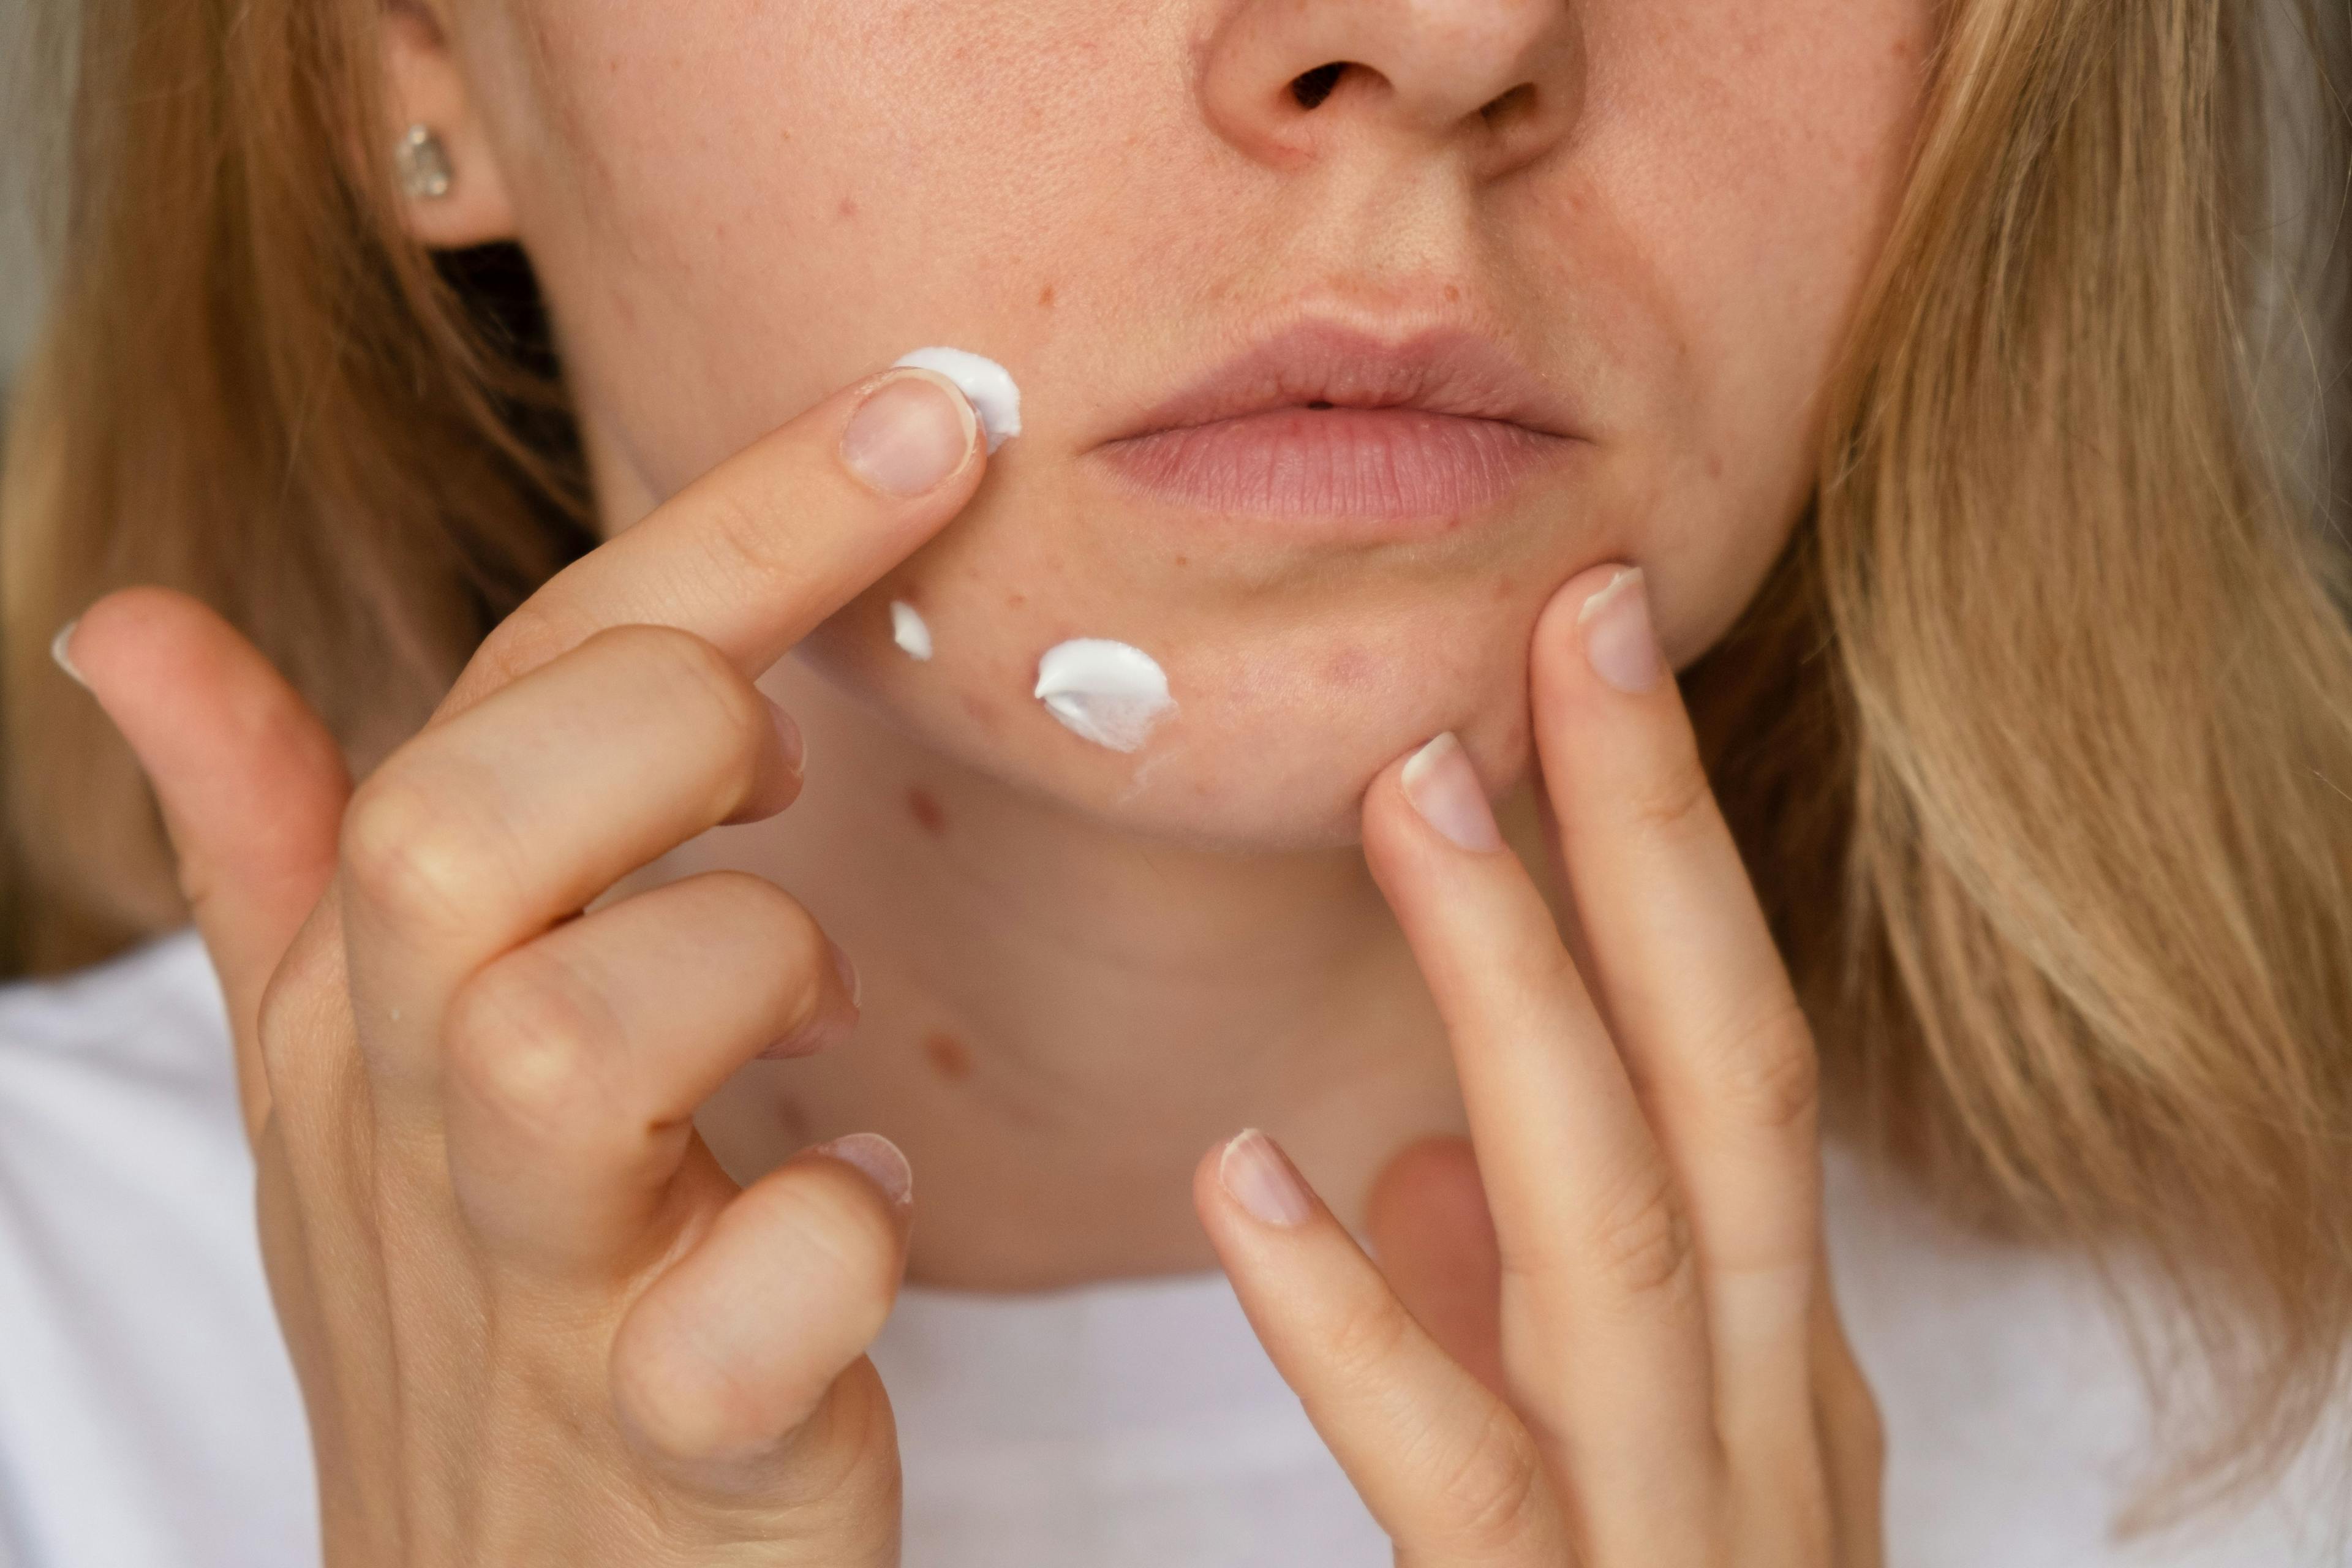 Woman using a product to treat acne / anna.stasiia - stock.adobe.com